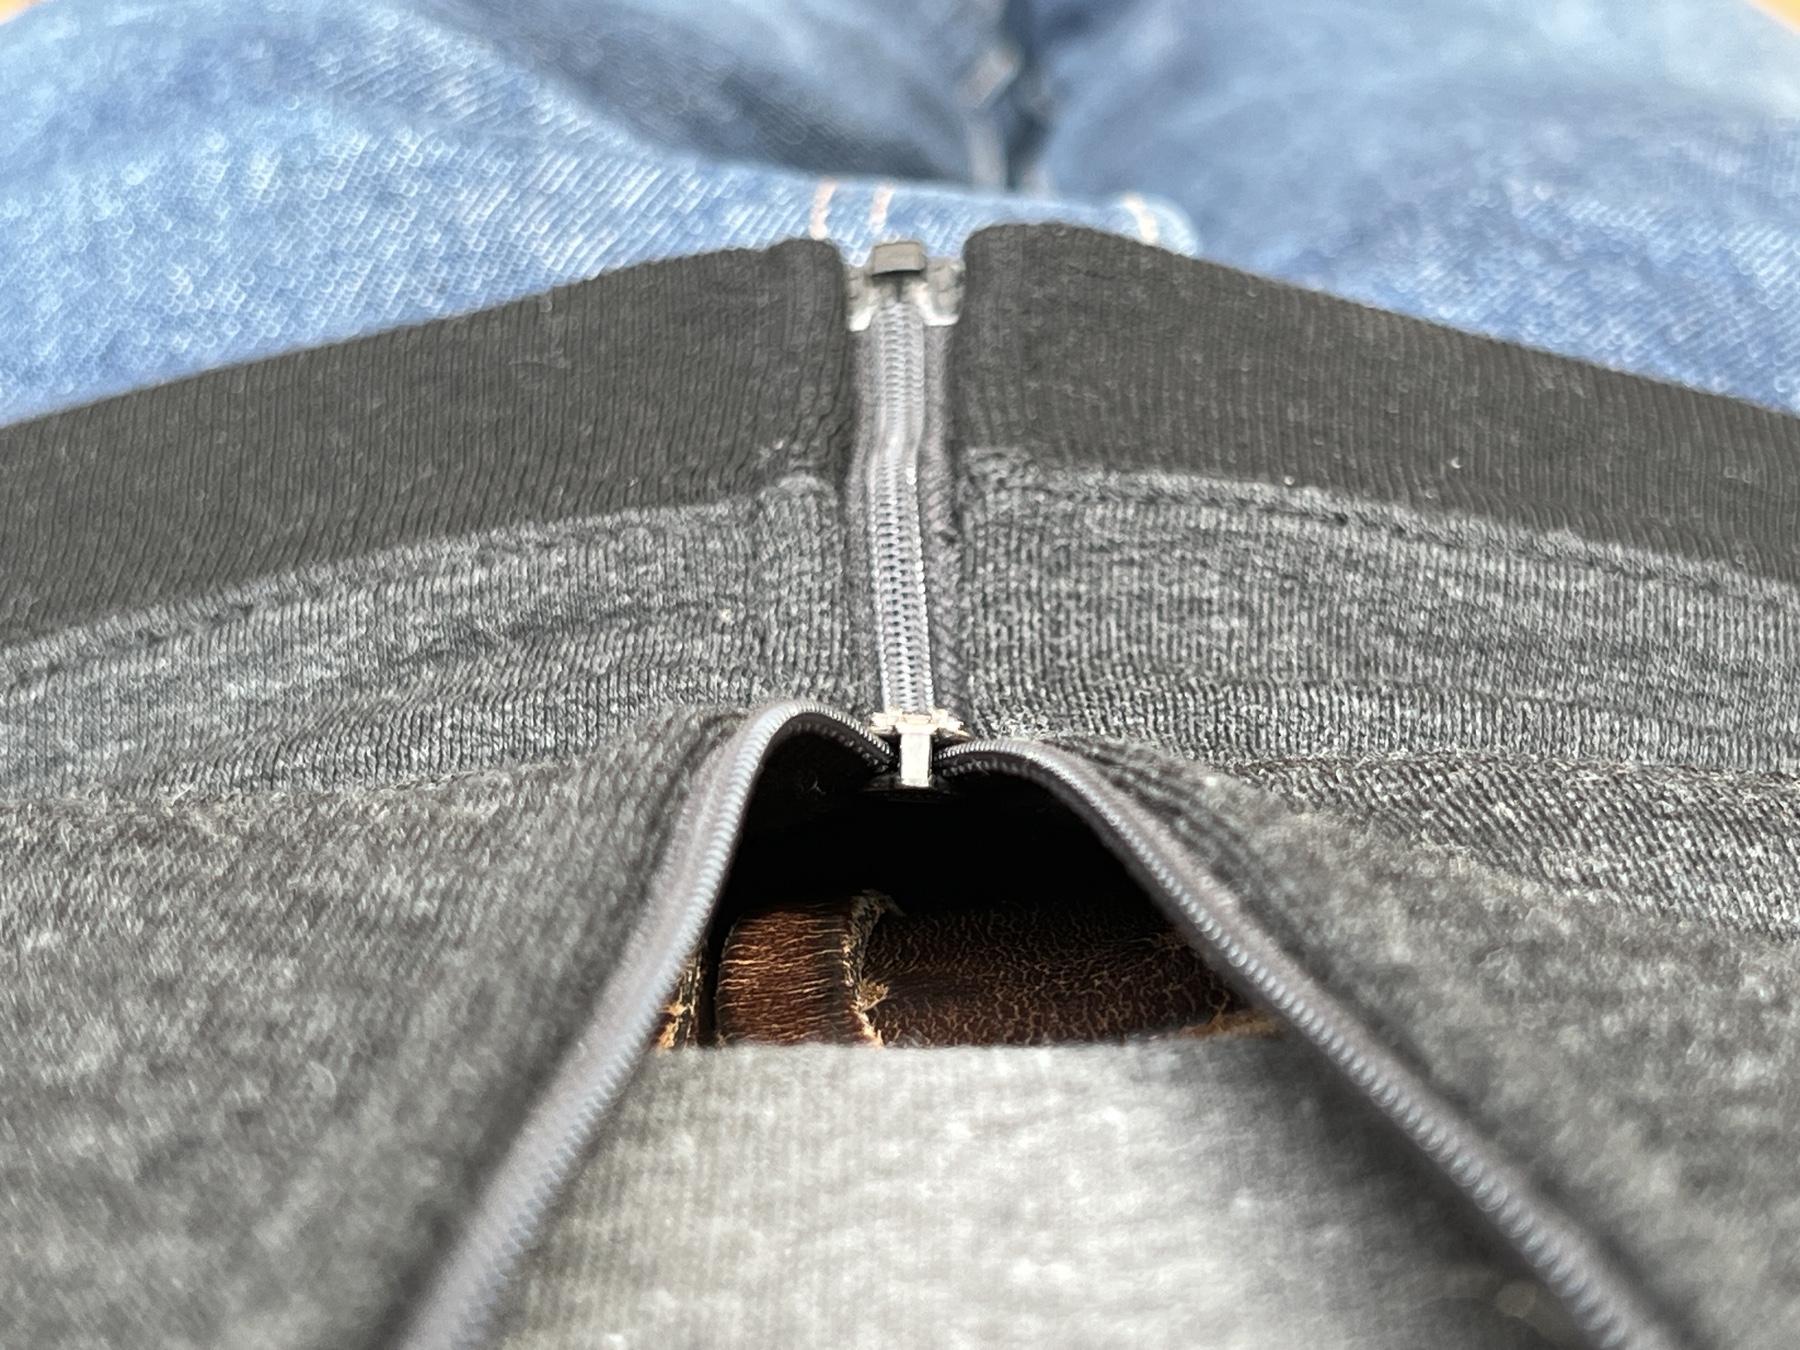 a zippered sweatshirt, shown from the wearers perspective, with zipper pull in close-up at center